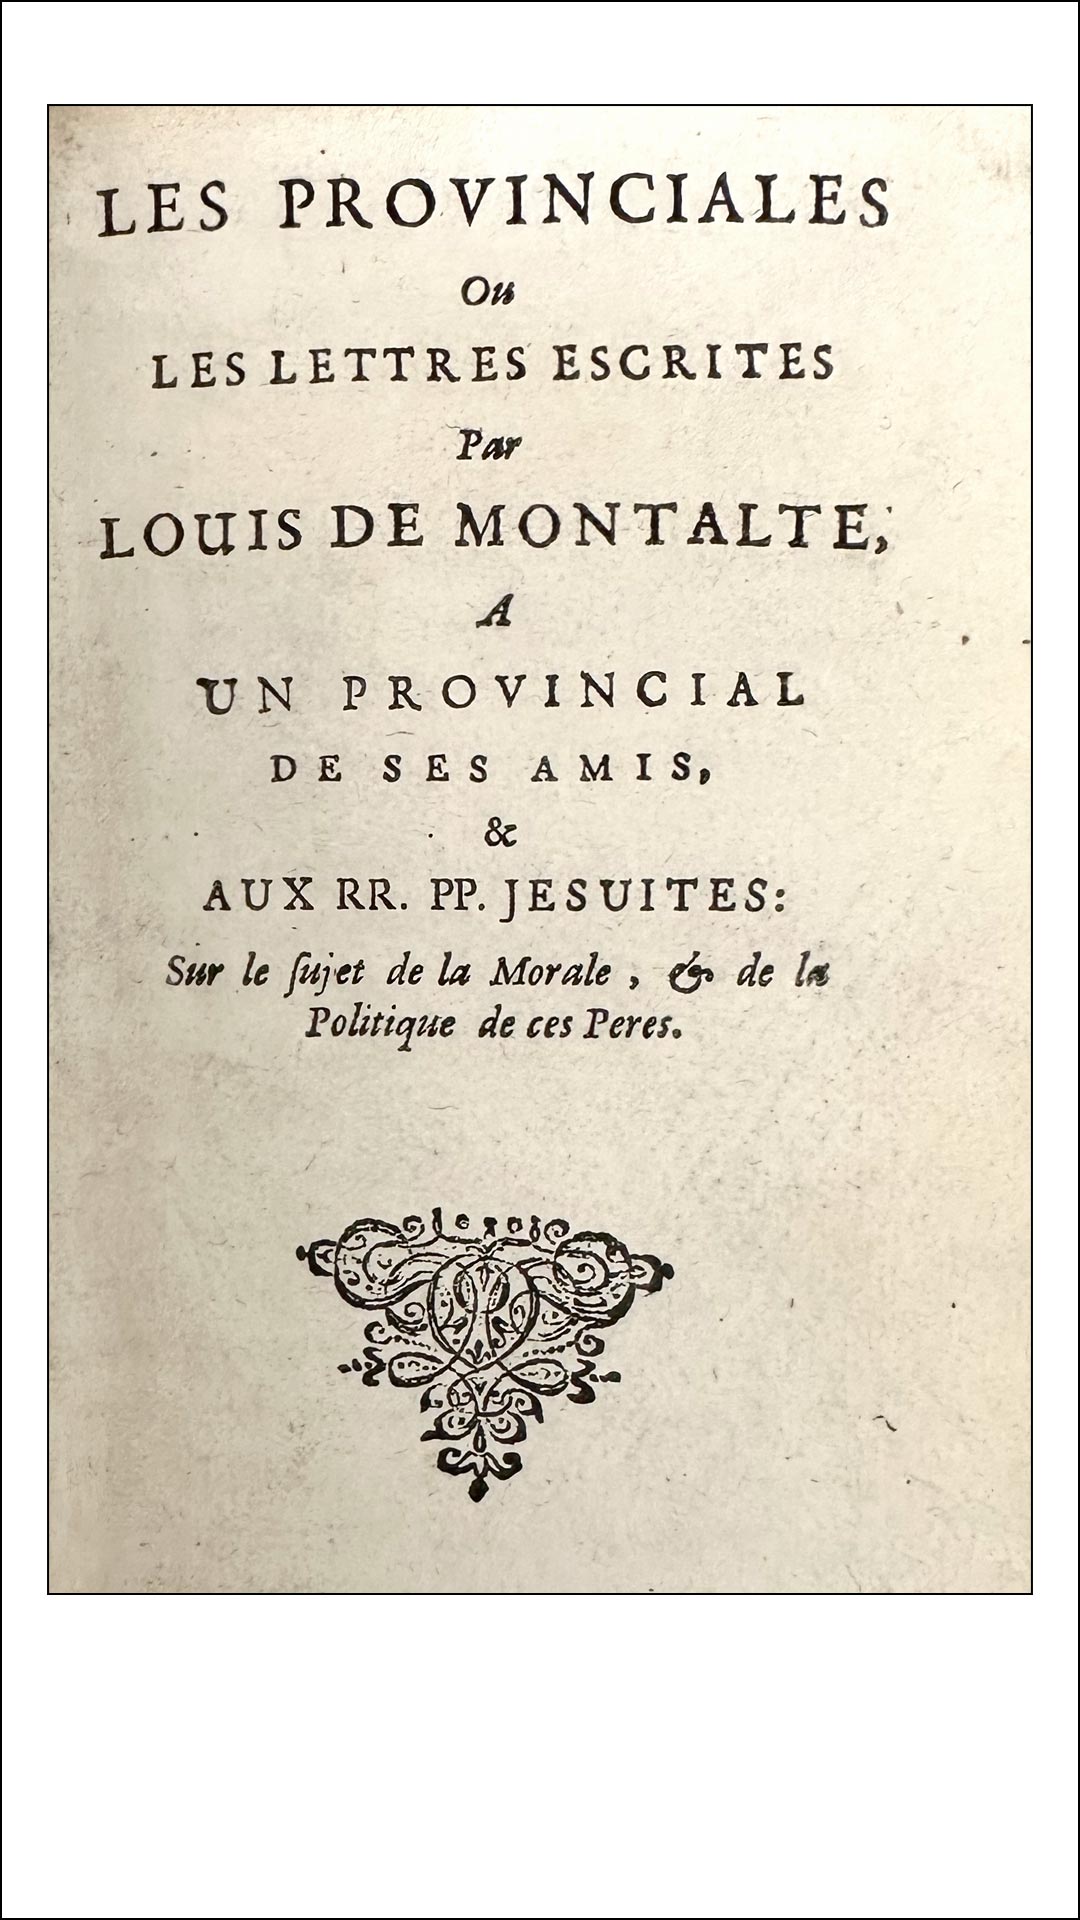 Book inside title page with french text and decorative illustration